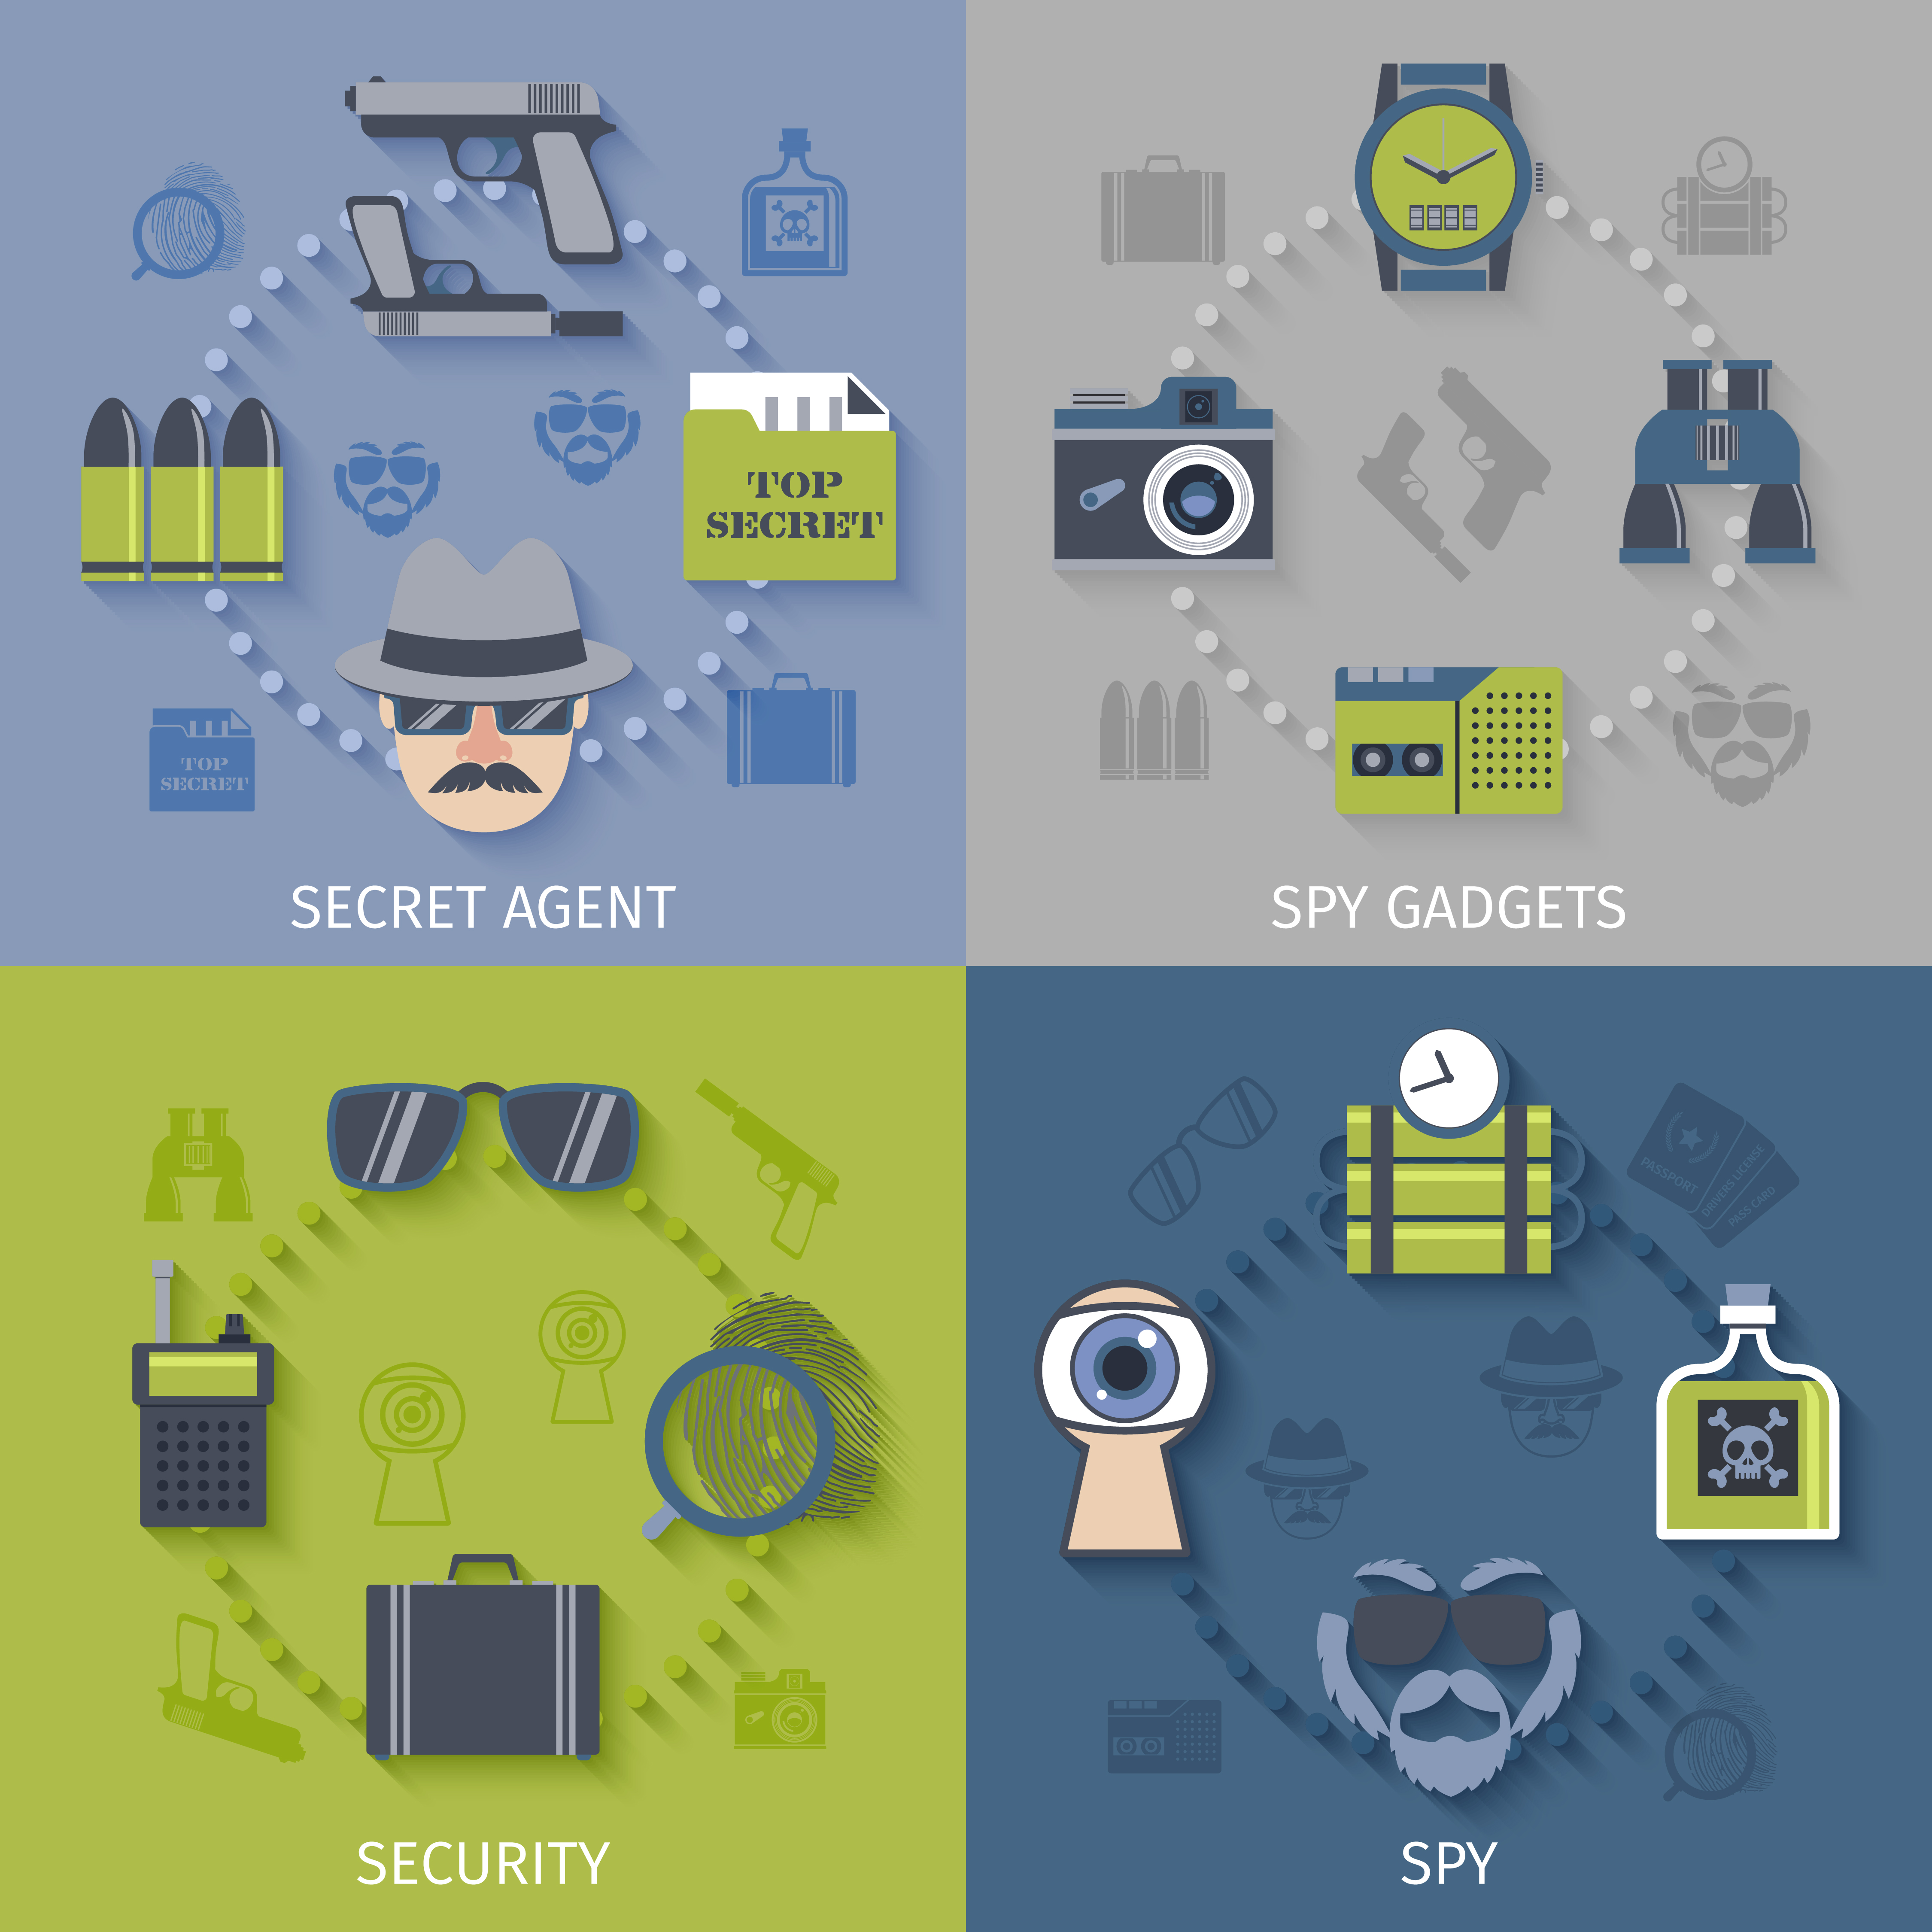 spy and security gadgets